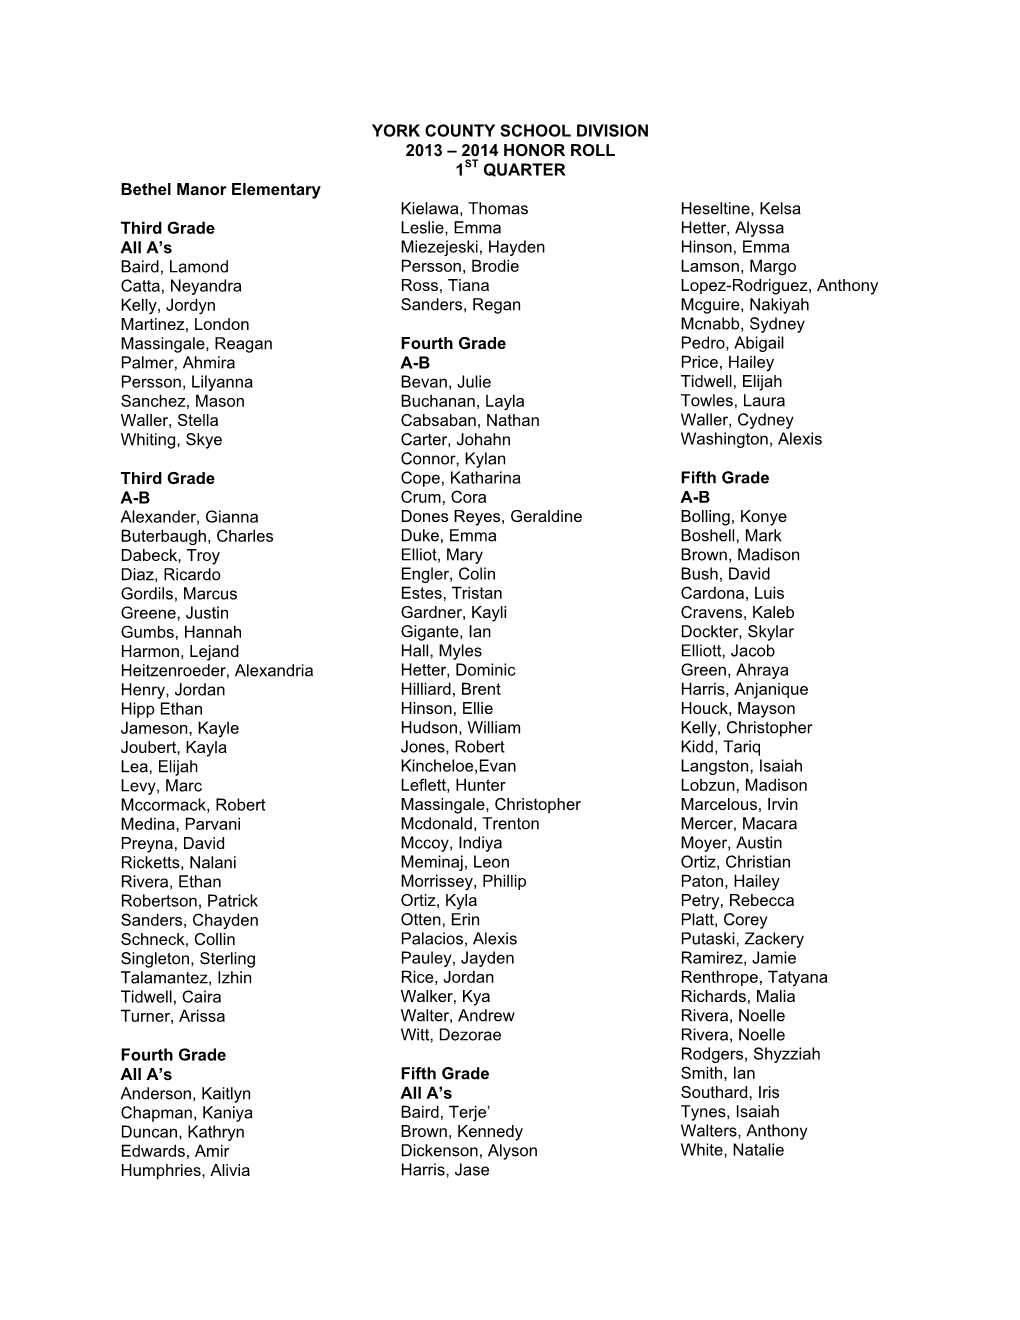 2013-14 1St Qtr Honor Roll